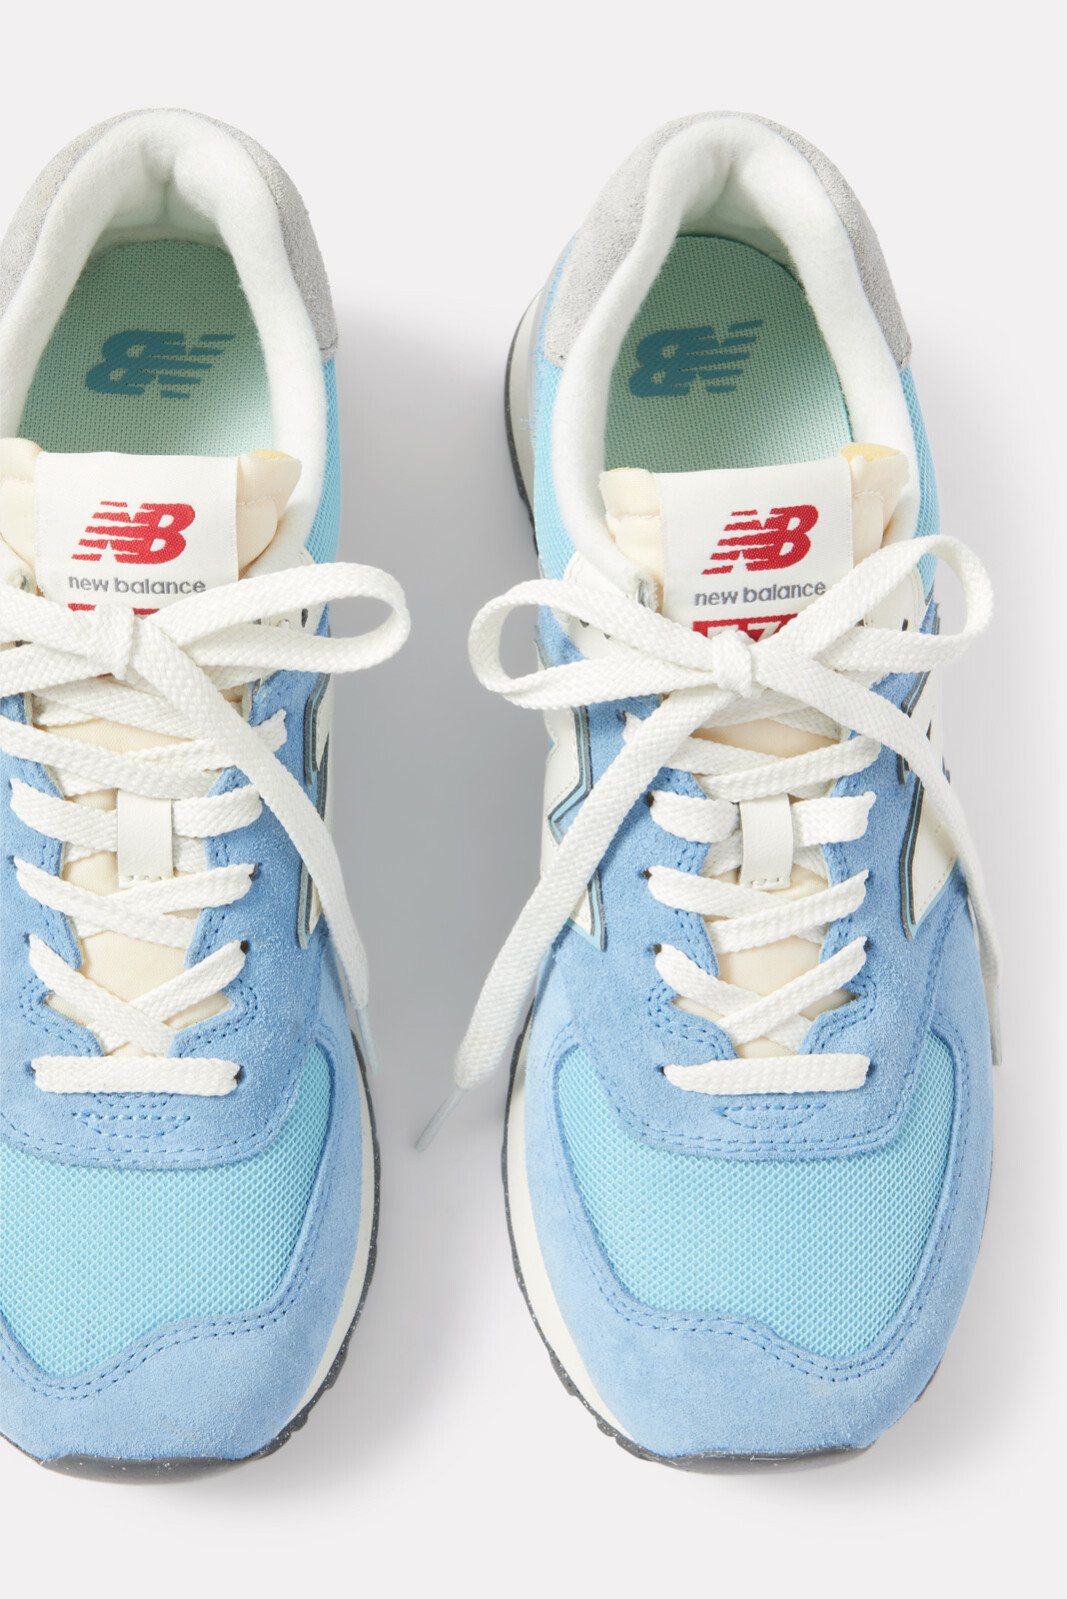 Behind the shoe: New Balance 574